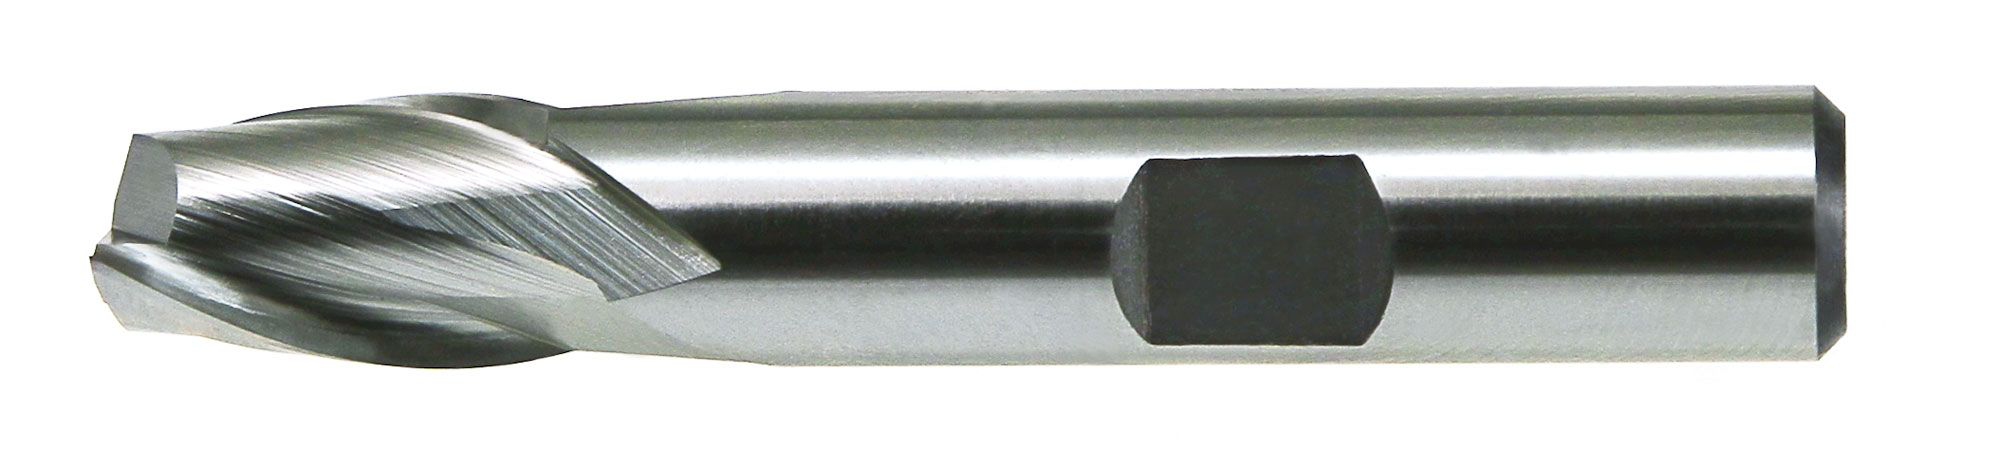 14.5, Two Flute Single End End-Mill 1/2" Shank USA